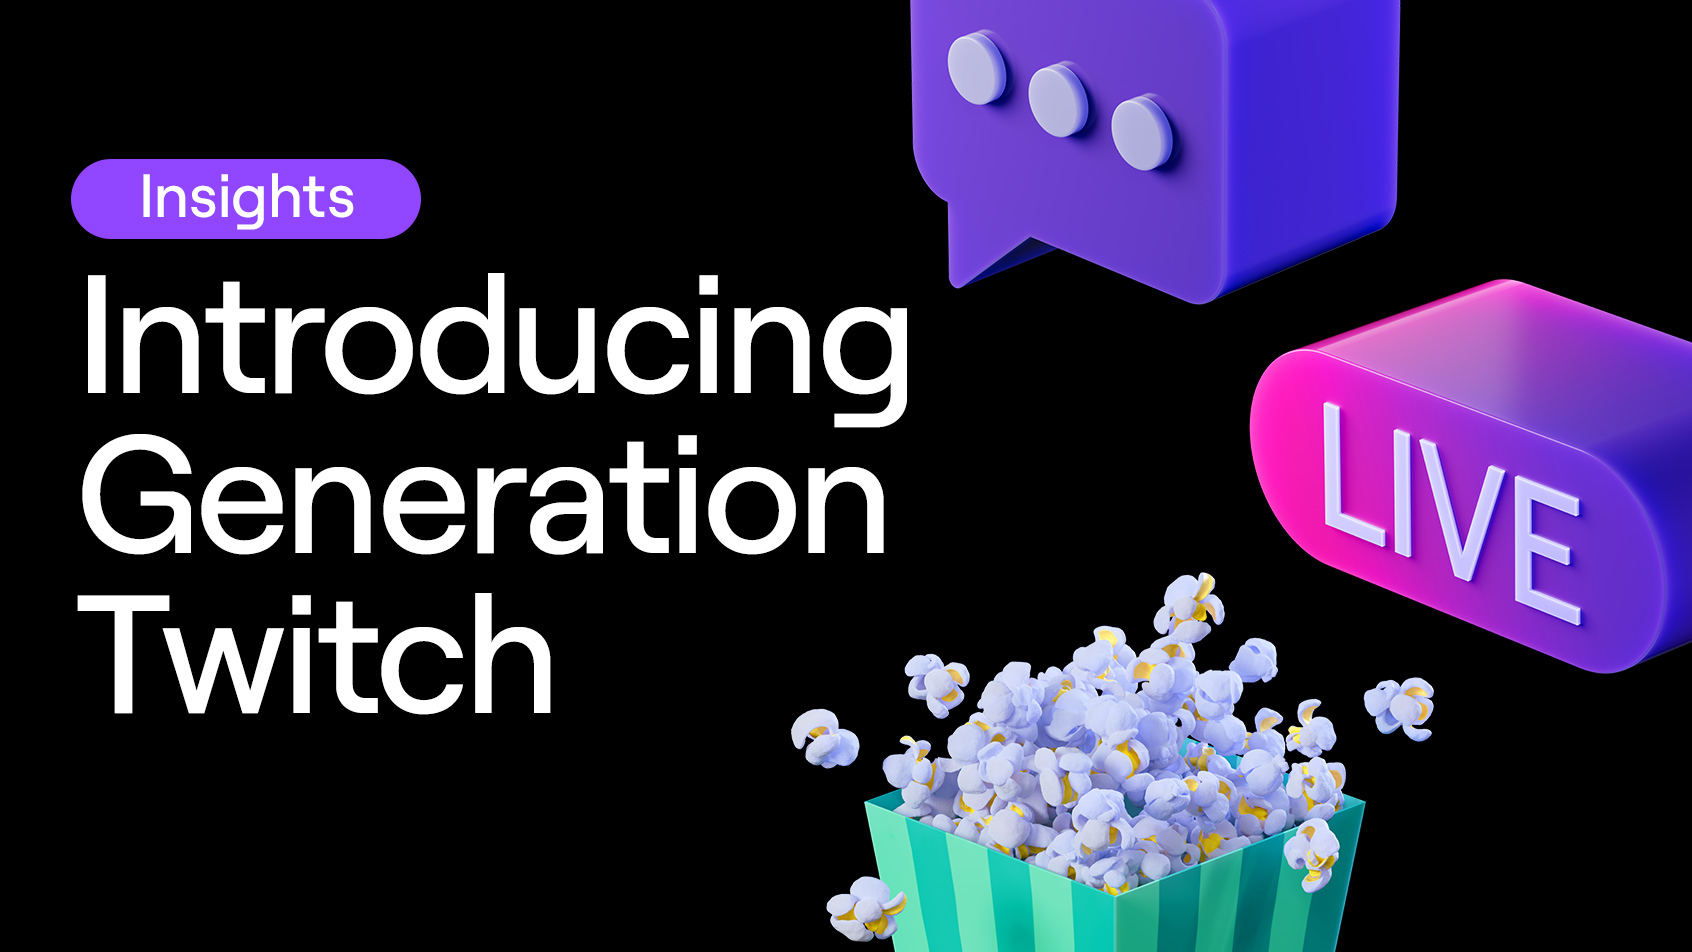 Insights: Introducing Generation Twitch